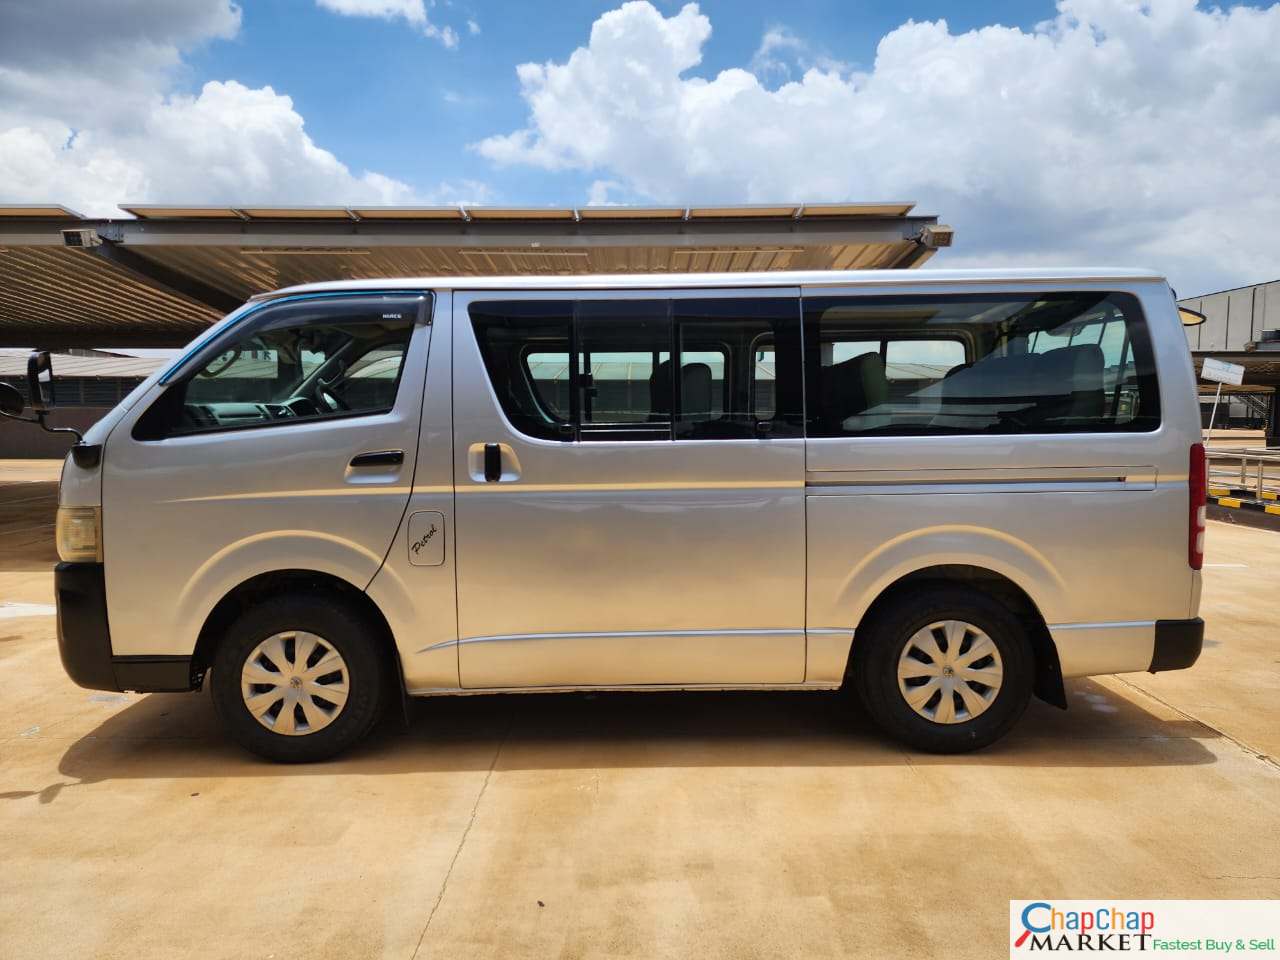 Toyota HIACE 7L QUICK SALE Private You Pay 40% DEPOSIT TRADE IN OK EXCLUSIVE